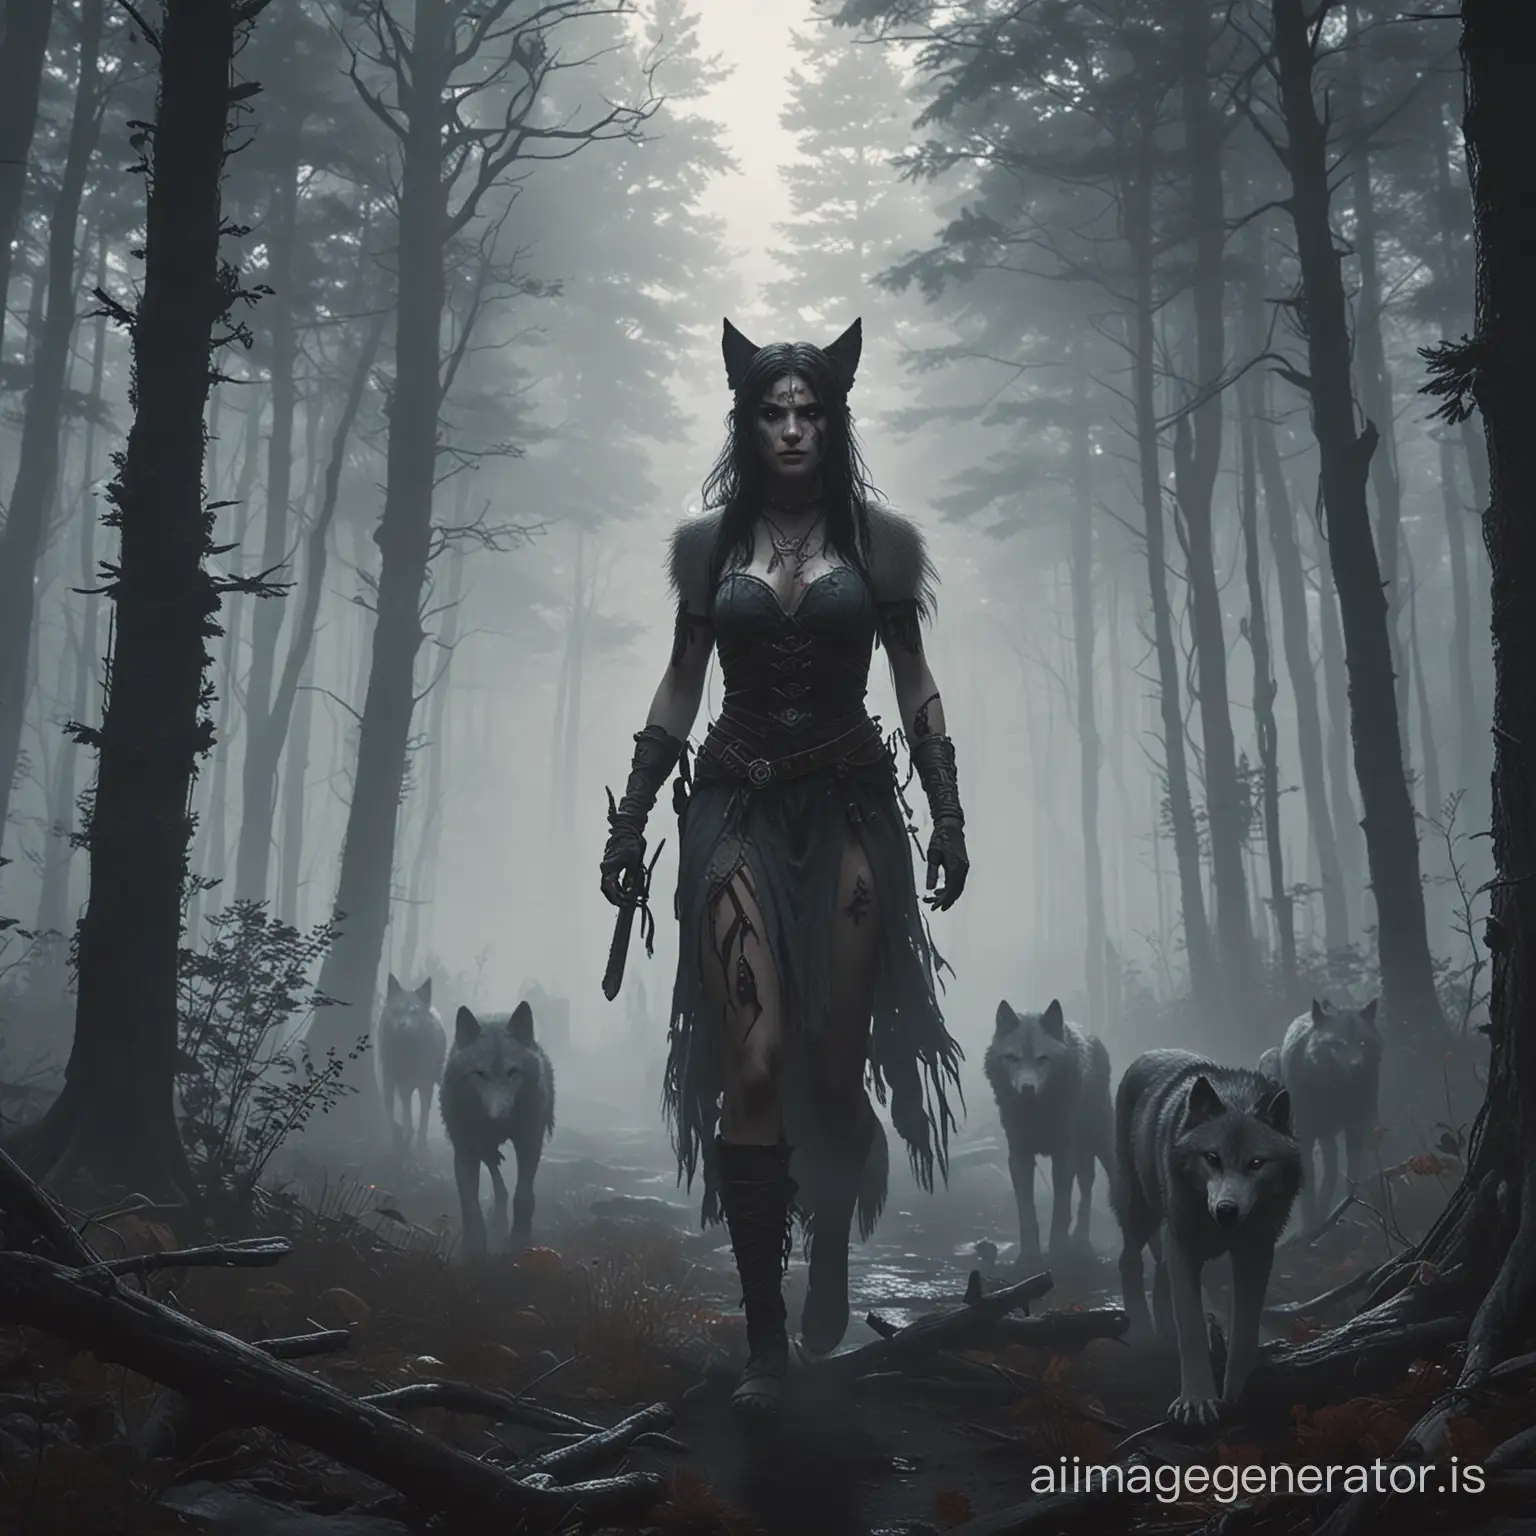 Mysterious-Wolf-Maiden-Ventures-into-Foggy-Forest-with-Companions